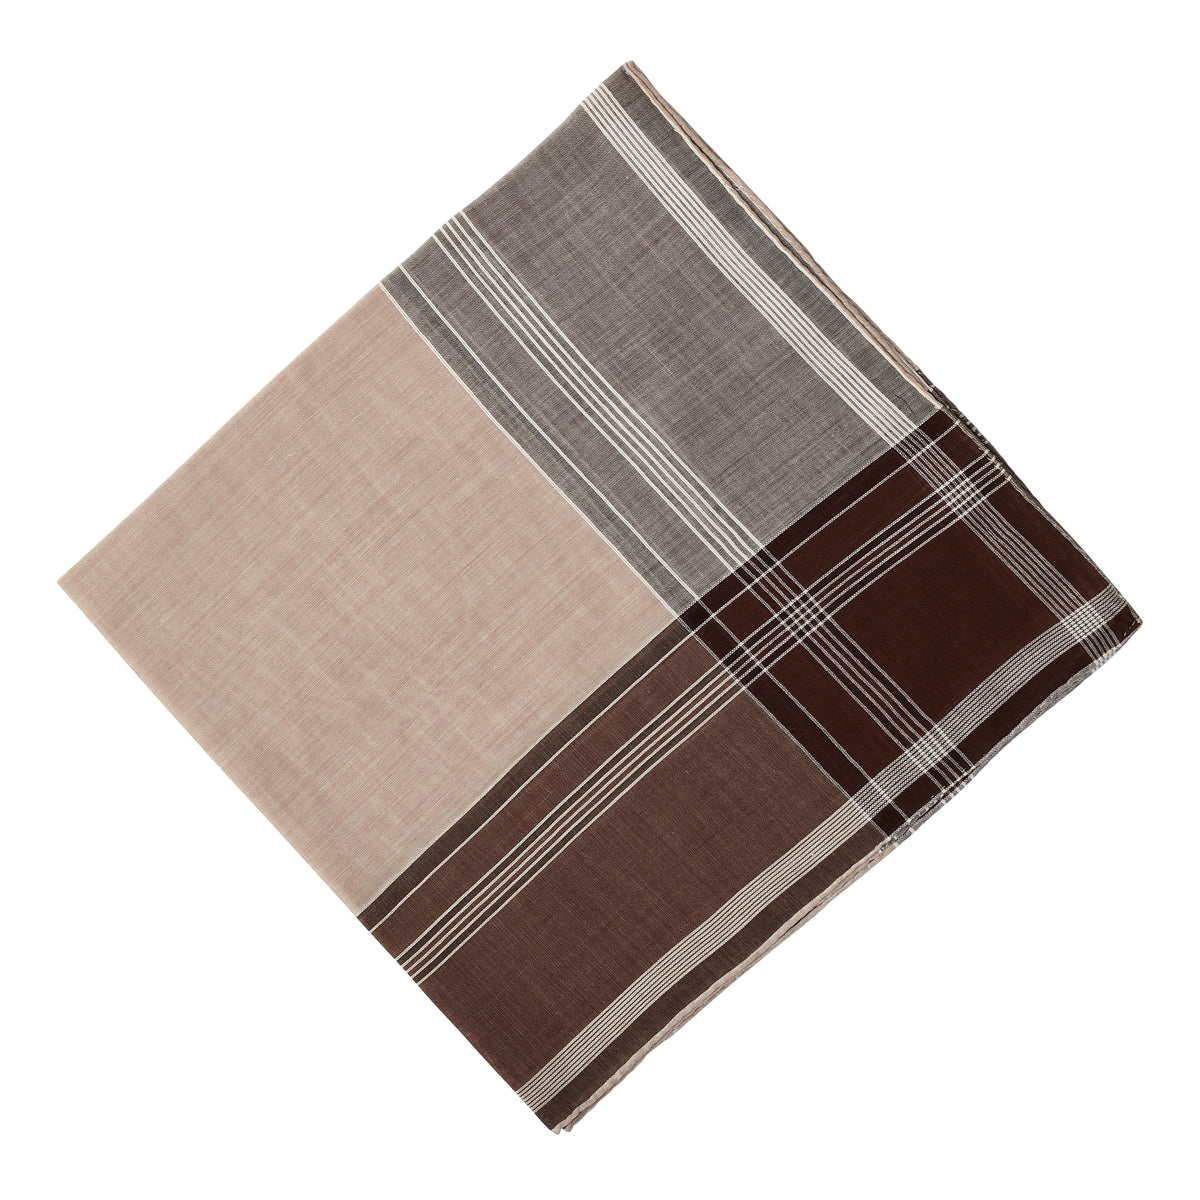 A brown and grey plaid Simonnot Godard Arlequin Marron pocket square made of Egyptian woven cotton, featuring a hand rolled hem, on a white background, available at KirbyAllison.com.